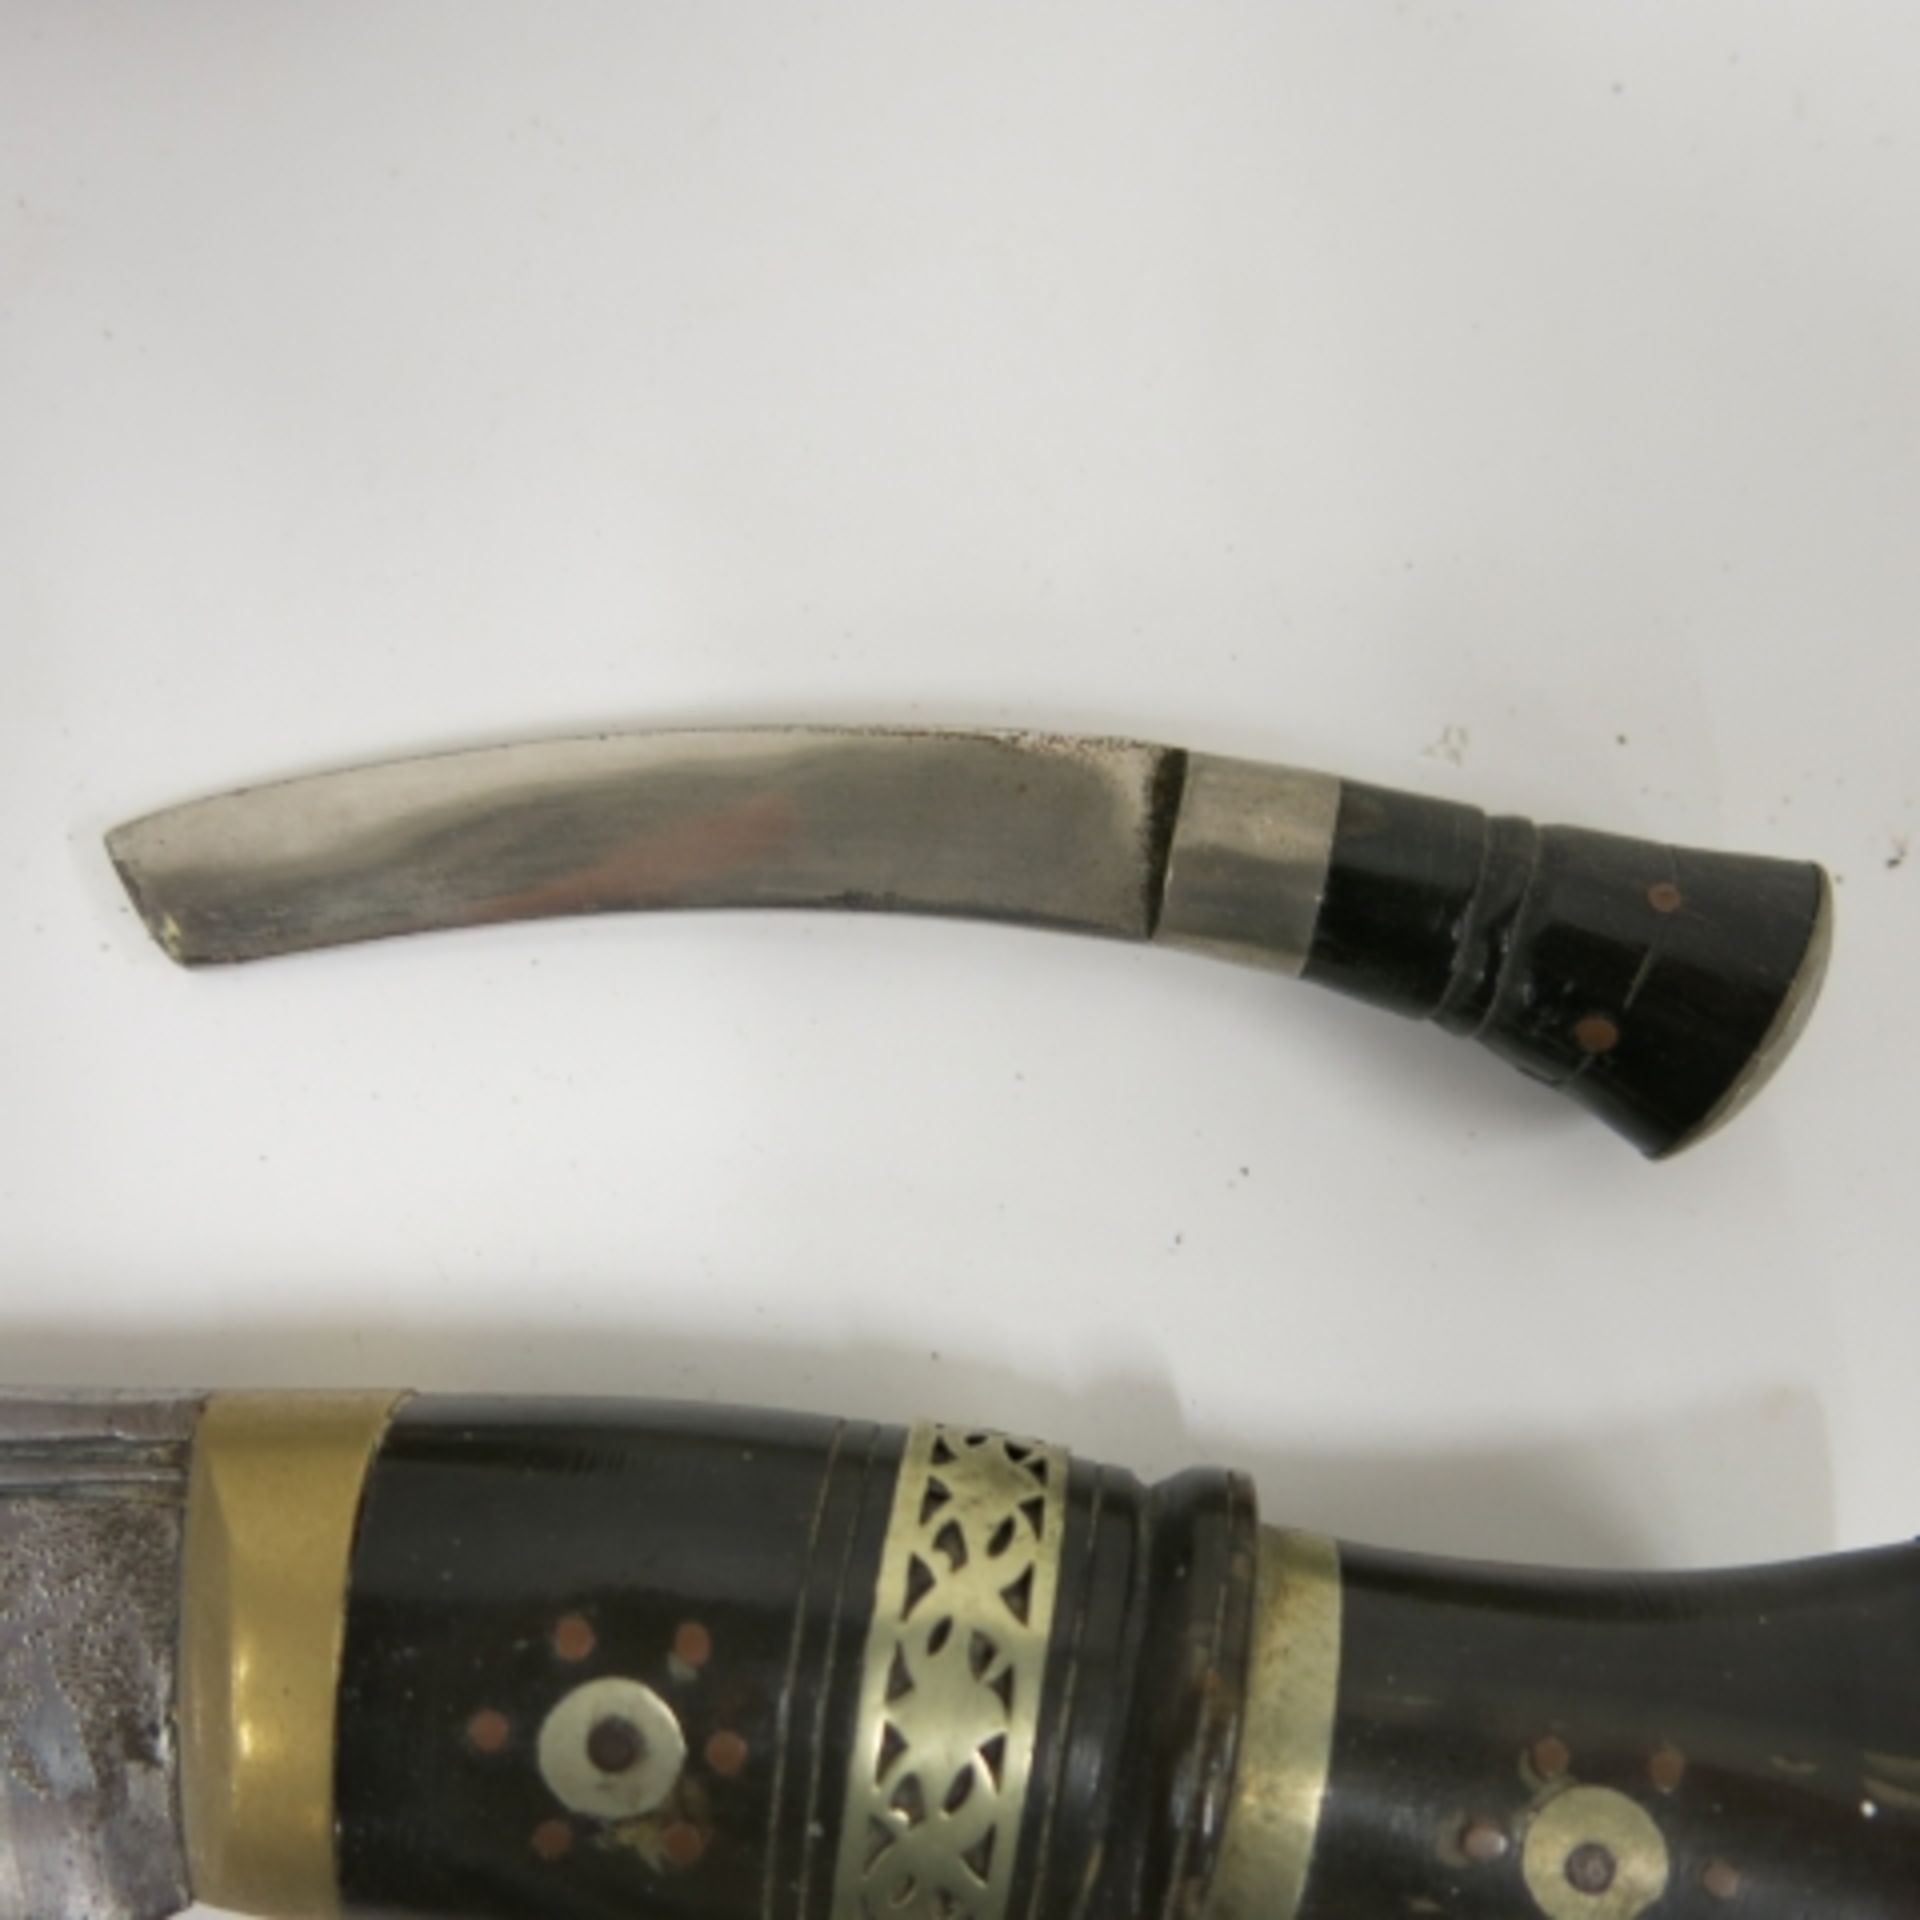 A Kukri knife with sheath and two accessory knives. Blade length 29cm (est. £50-£80) - Image 4 of 5